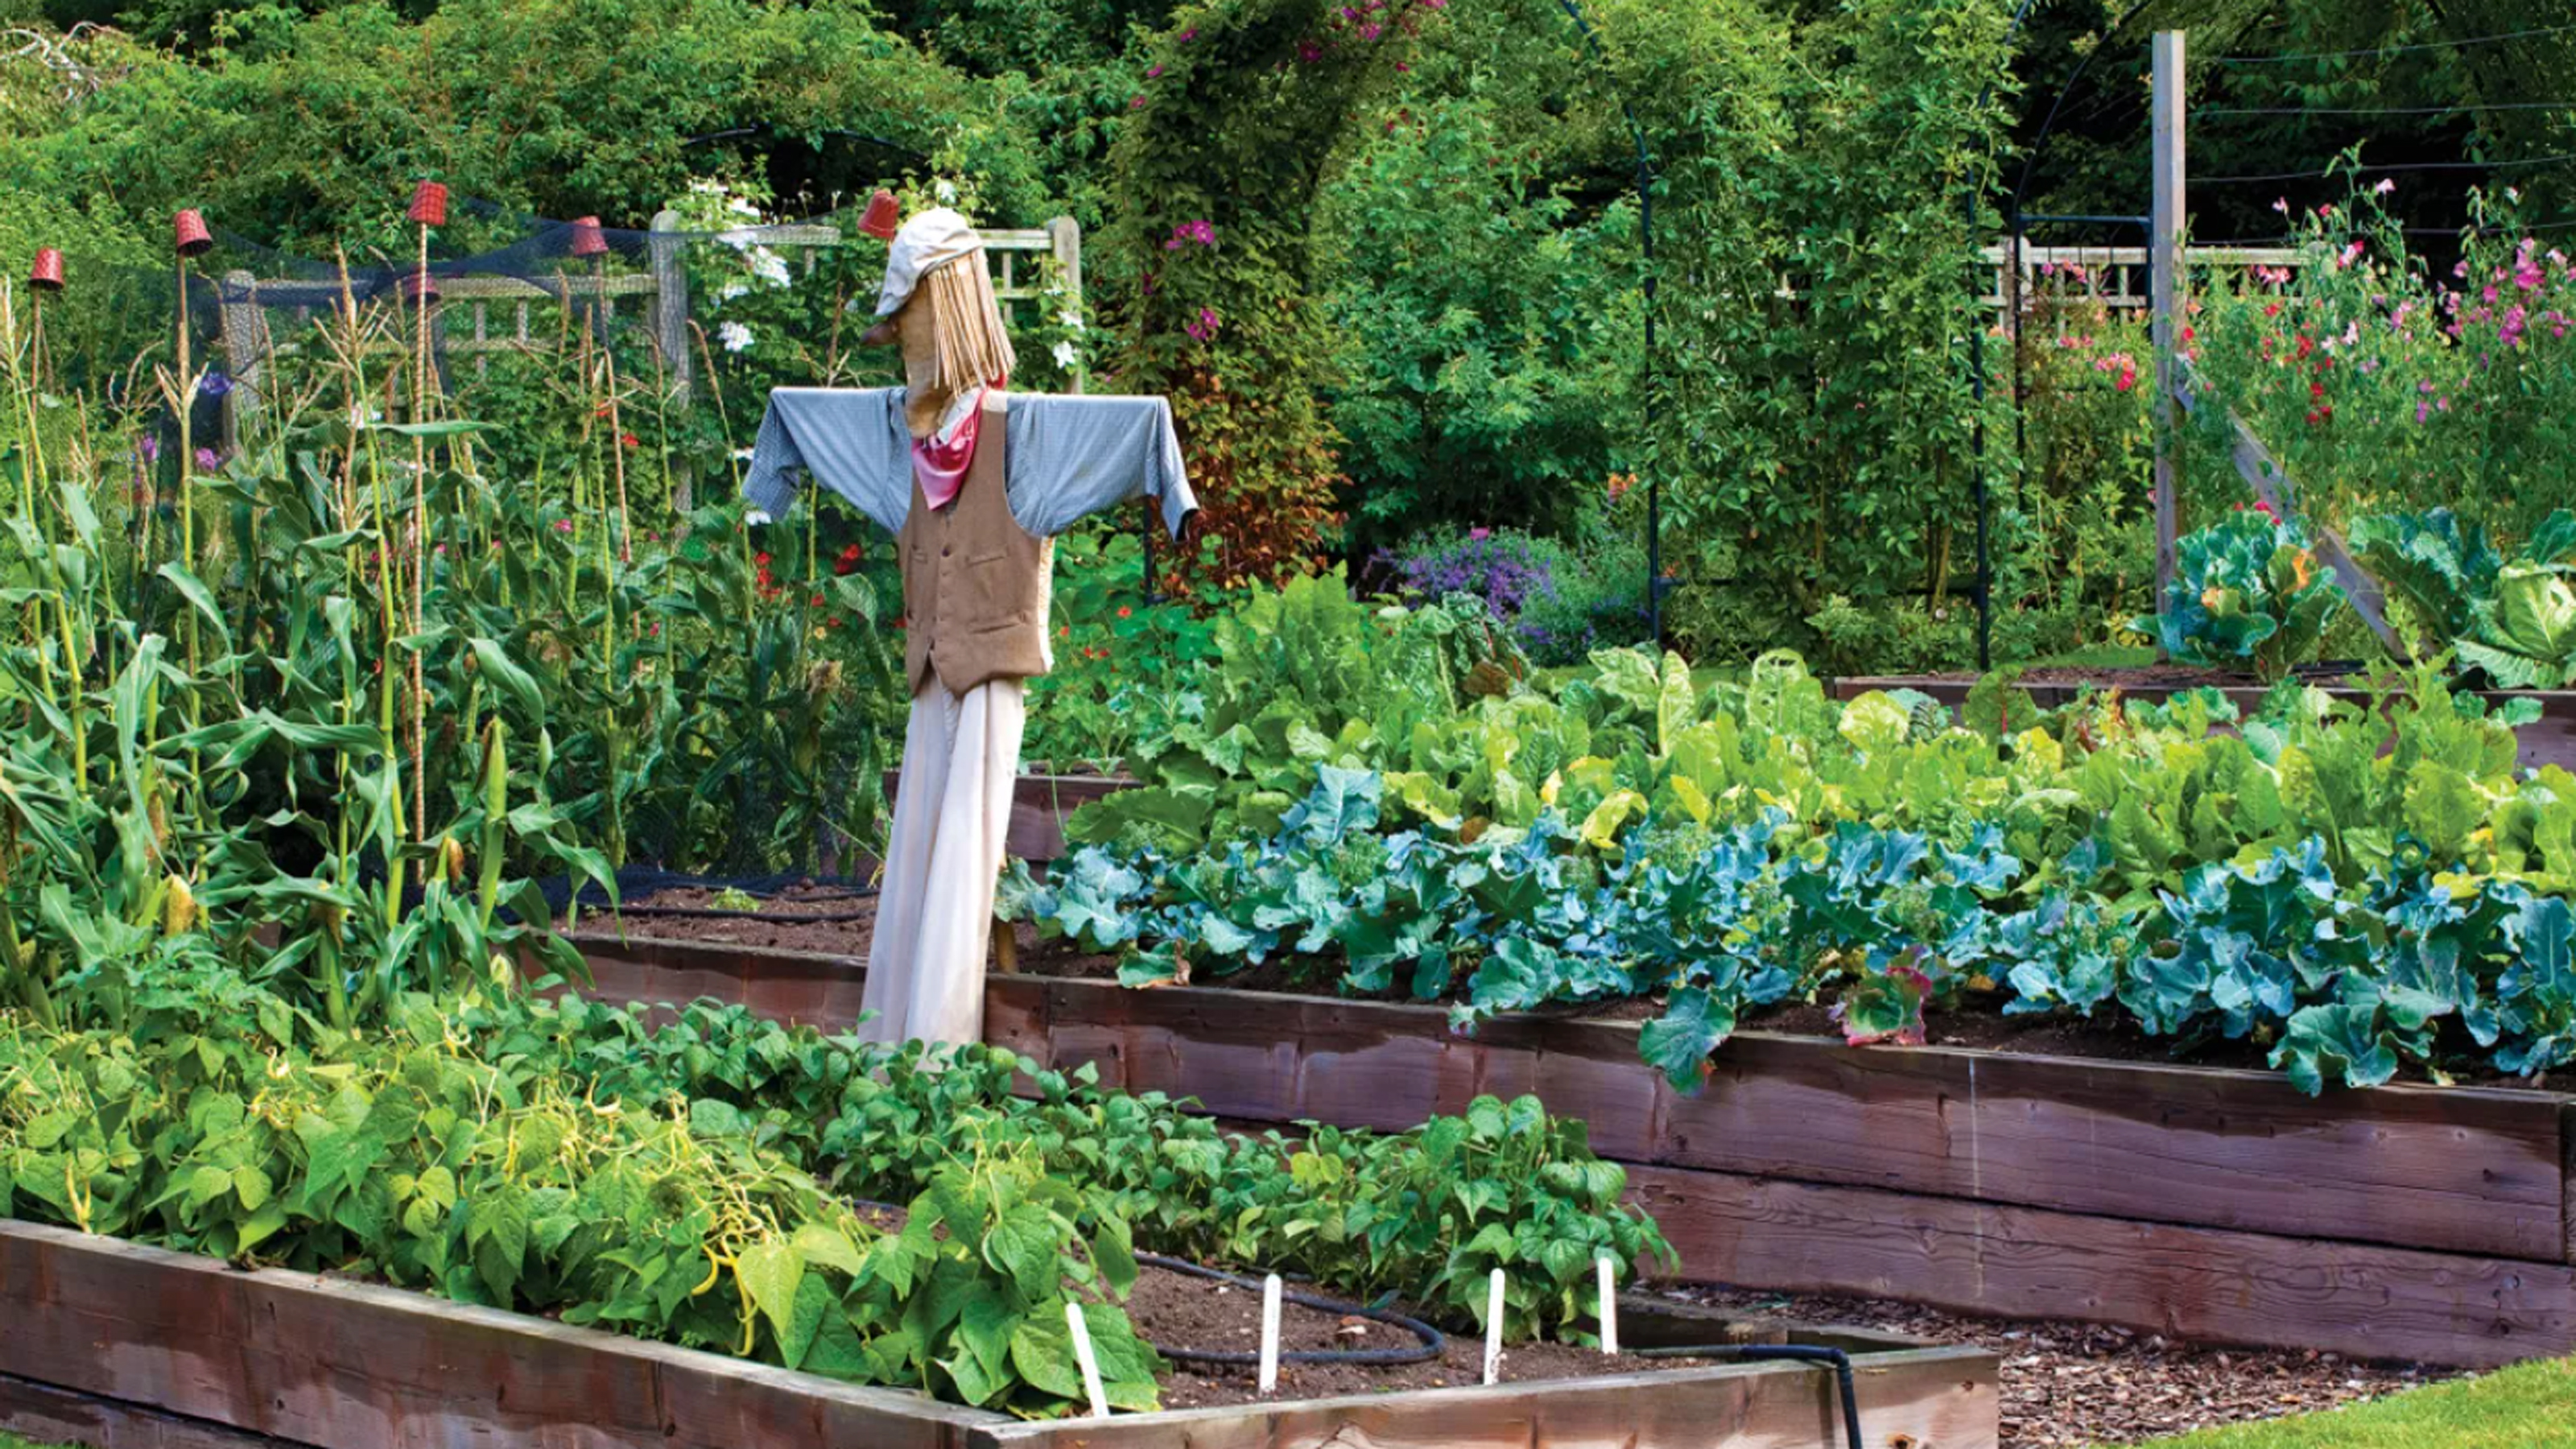 This is why raised garden beds are worth the trouble